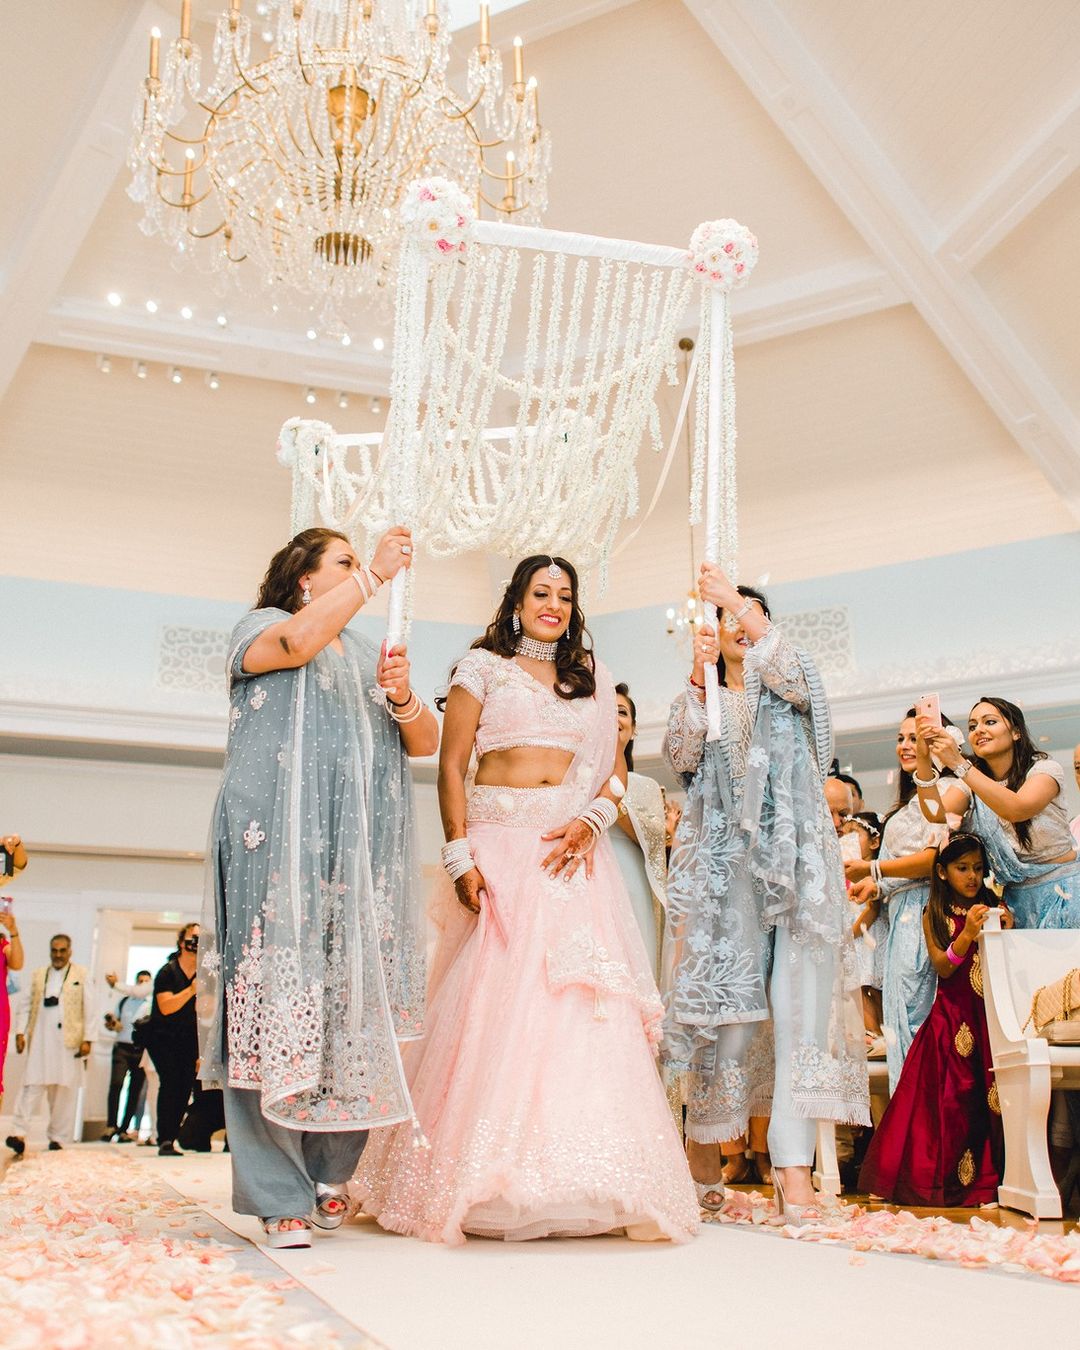 See how culture and Disney weddings come to life in this ceremony.